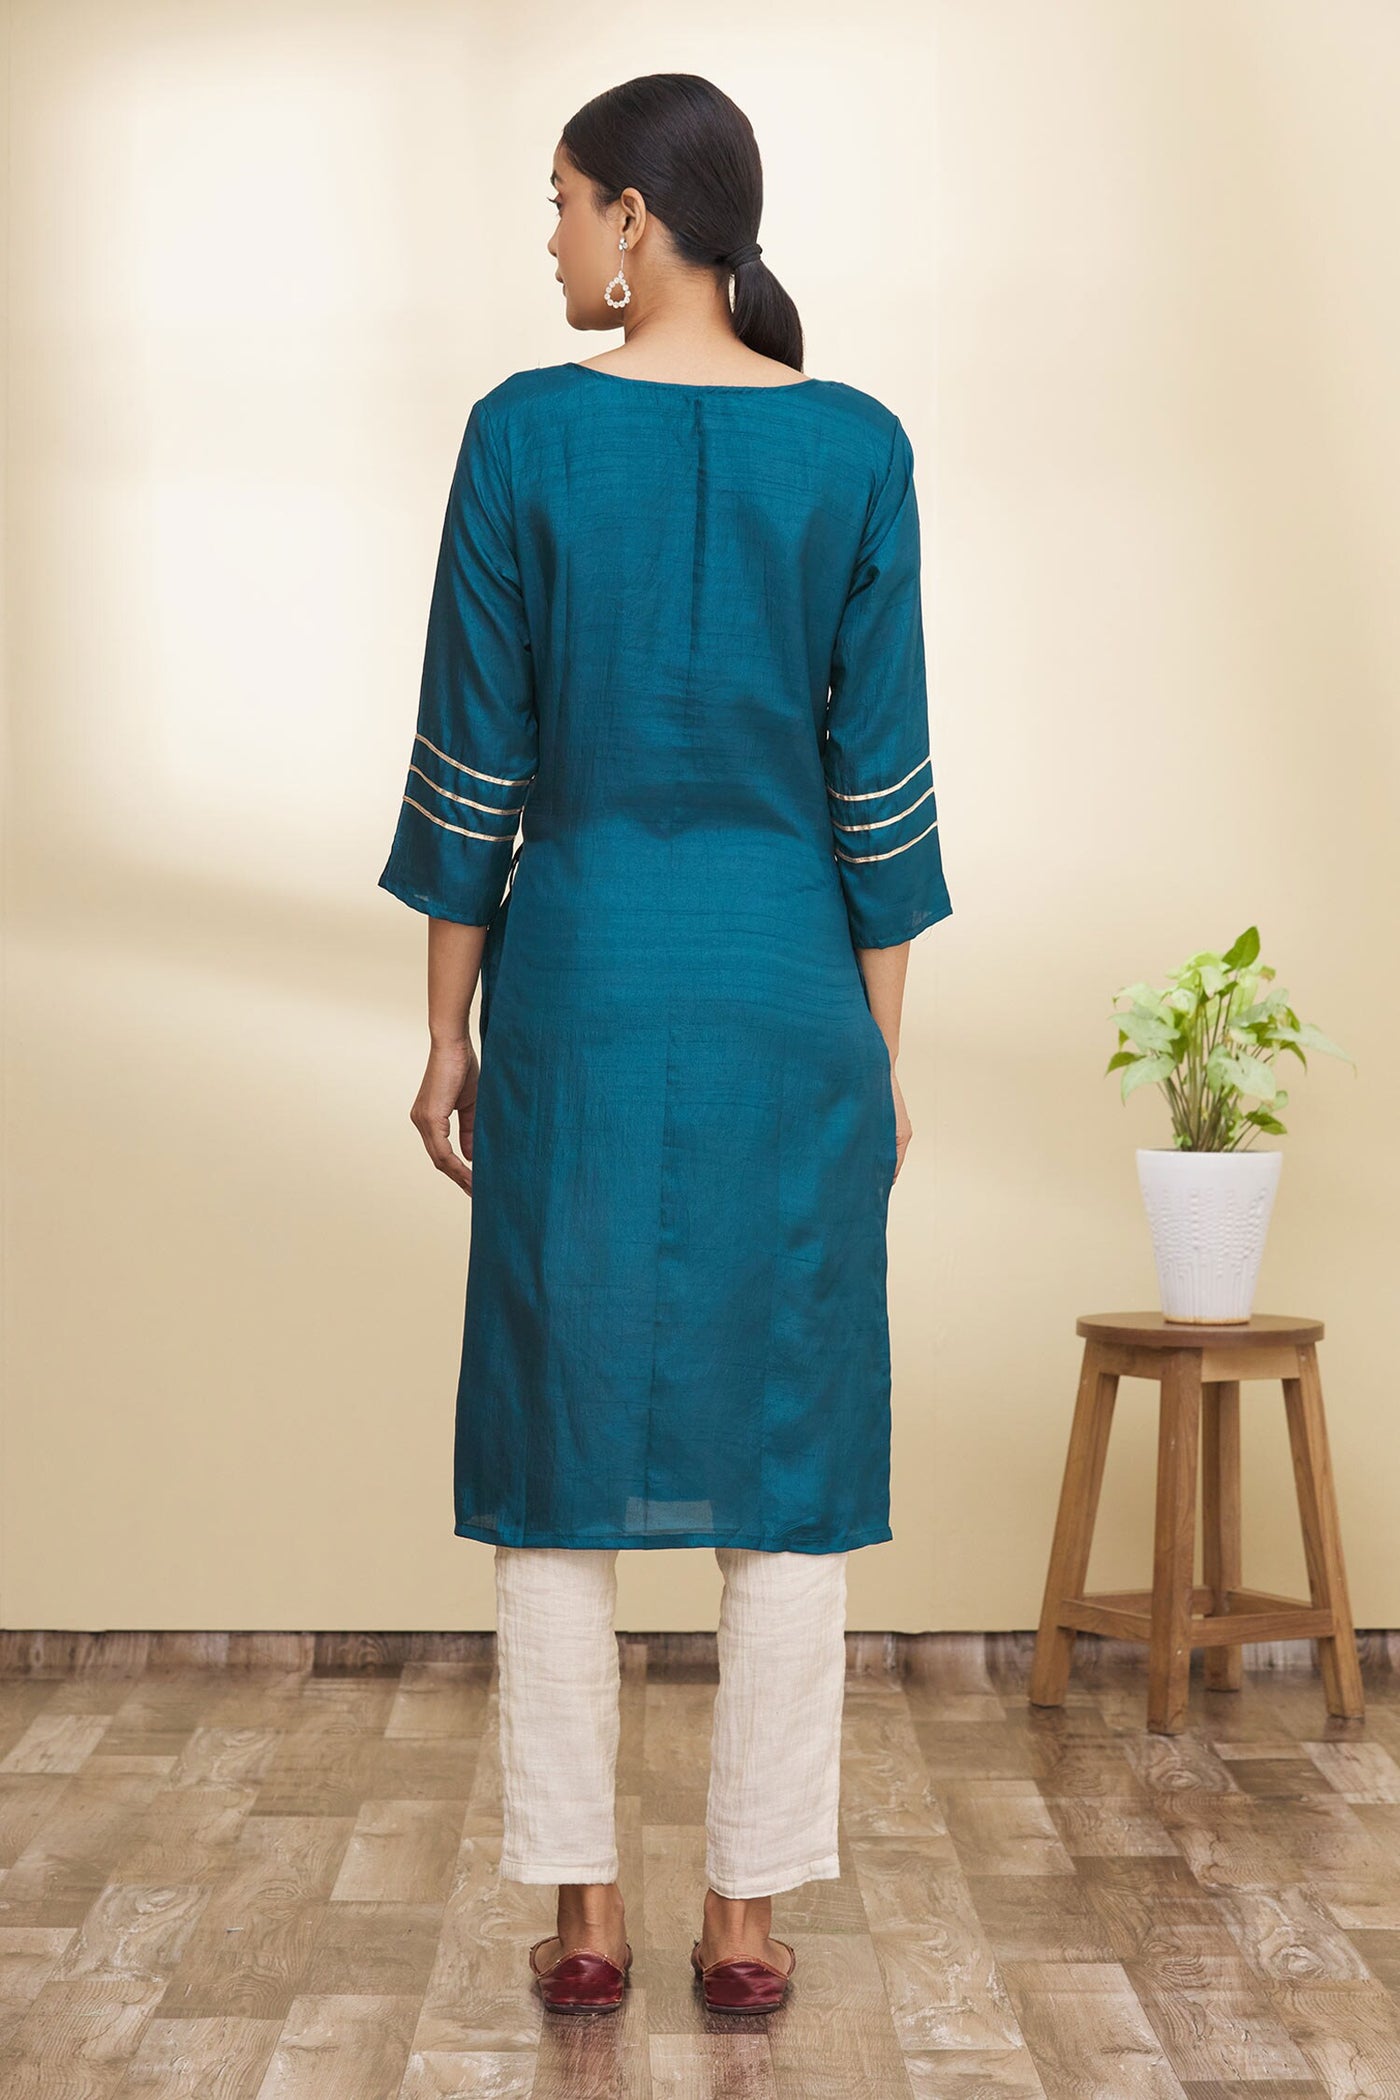 Blue Floral Design Kurta - Indian Clothing in Denver, CO, Aurora, CO, Boulder, CO, Fort Collins, CO, Colorado Springs, CO, Parker, CO, Highlands Ranch, CO, Cherry Creek, CO, Centennial, CO, and Longmont, CO. Nationwide shipping USA - India Fashion X